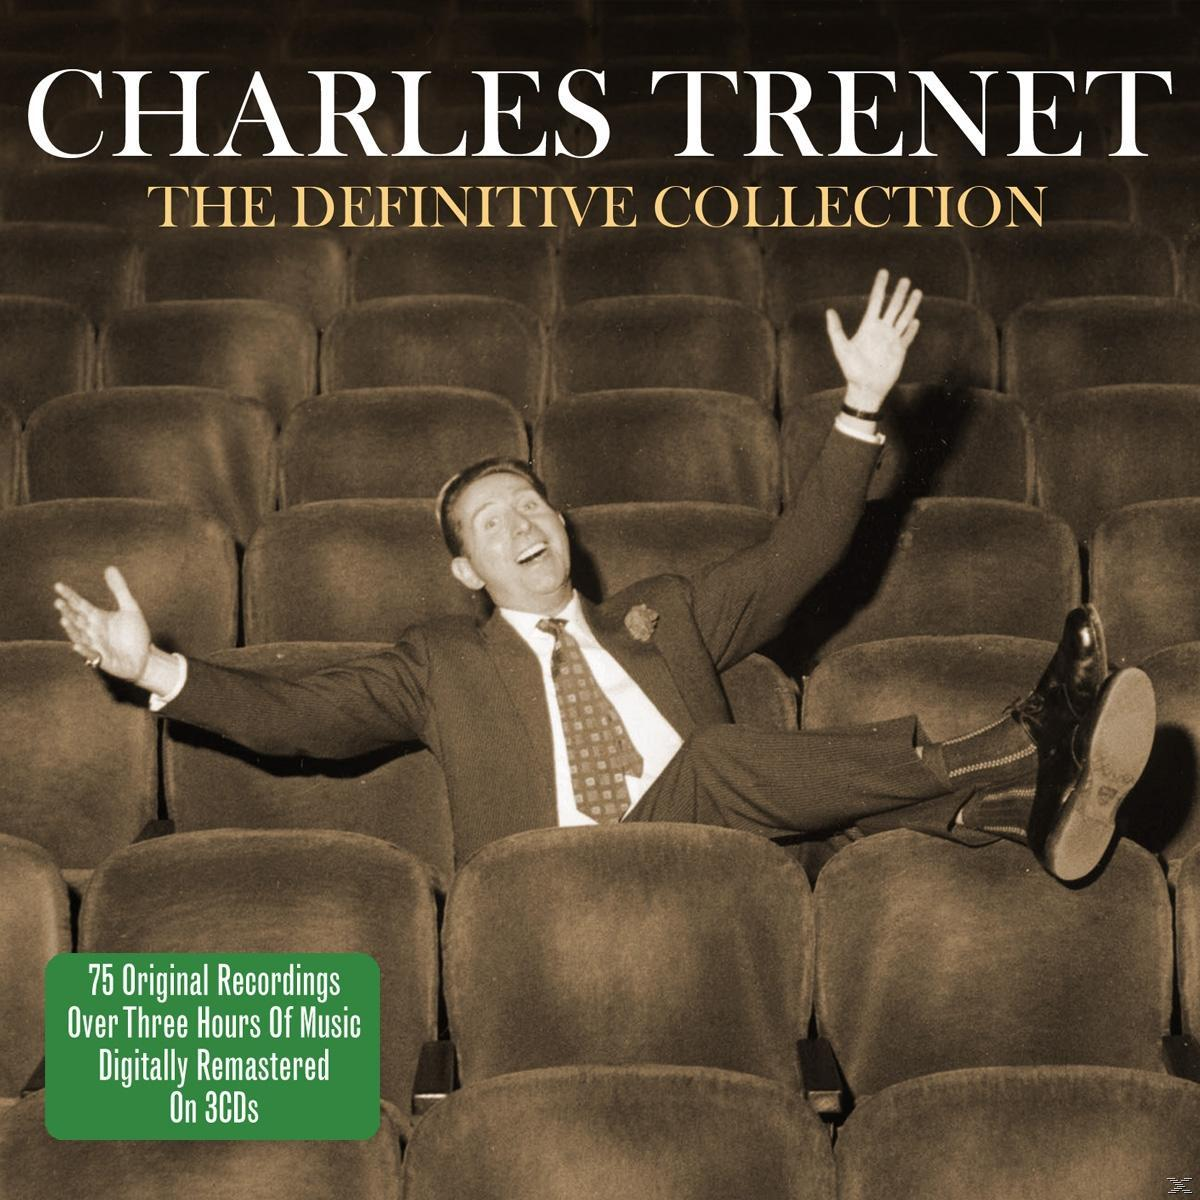 - Collection - Charles Trenet Definitive (CD)